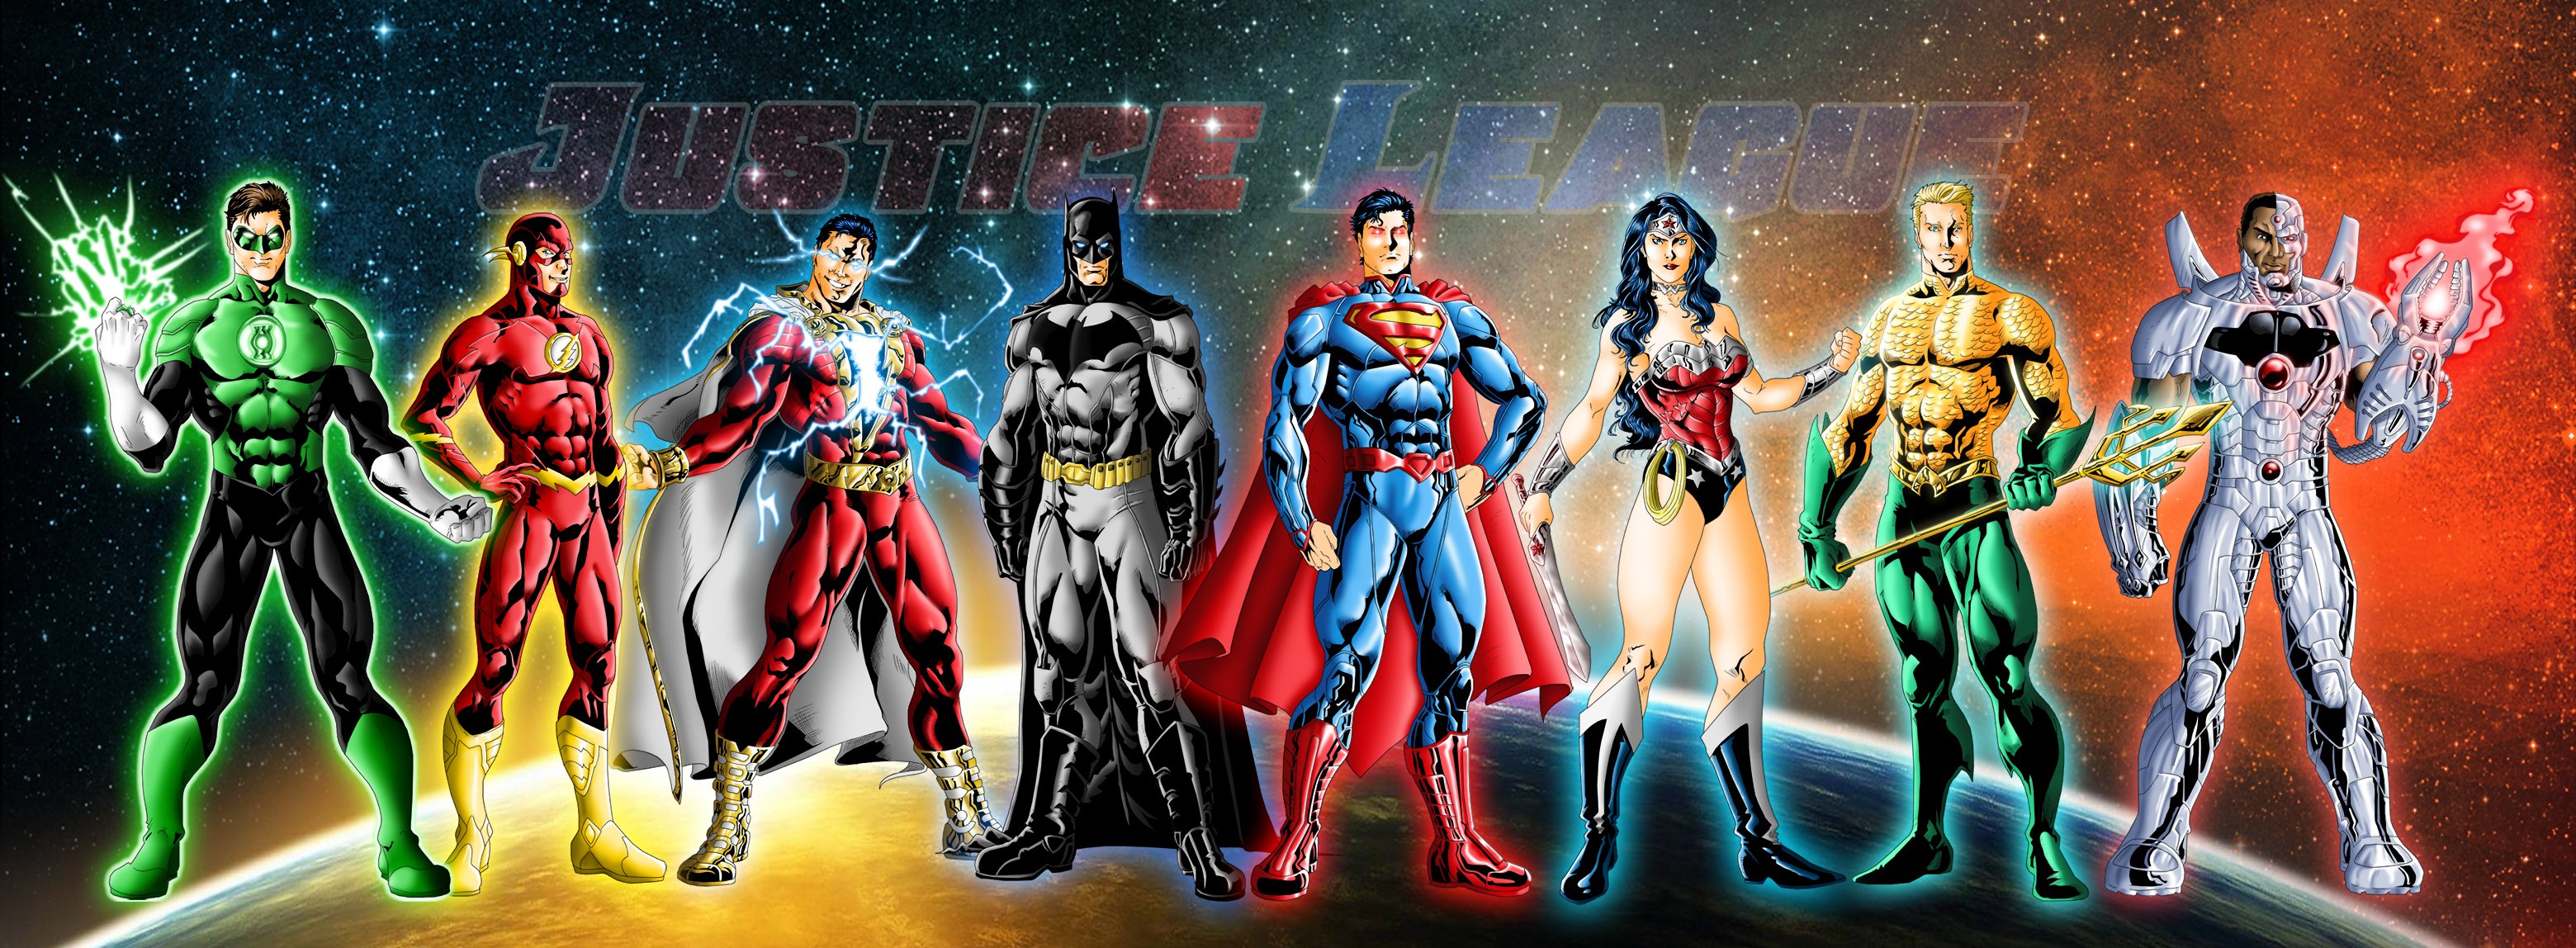 New 52 Justice League by JeanSinclairArts 3120x1148